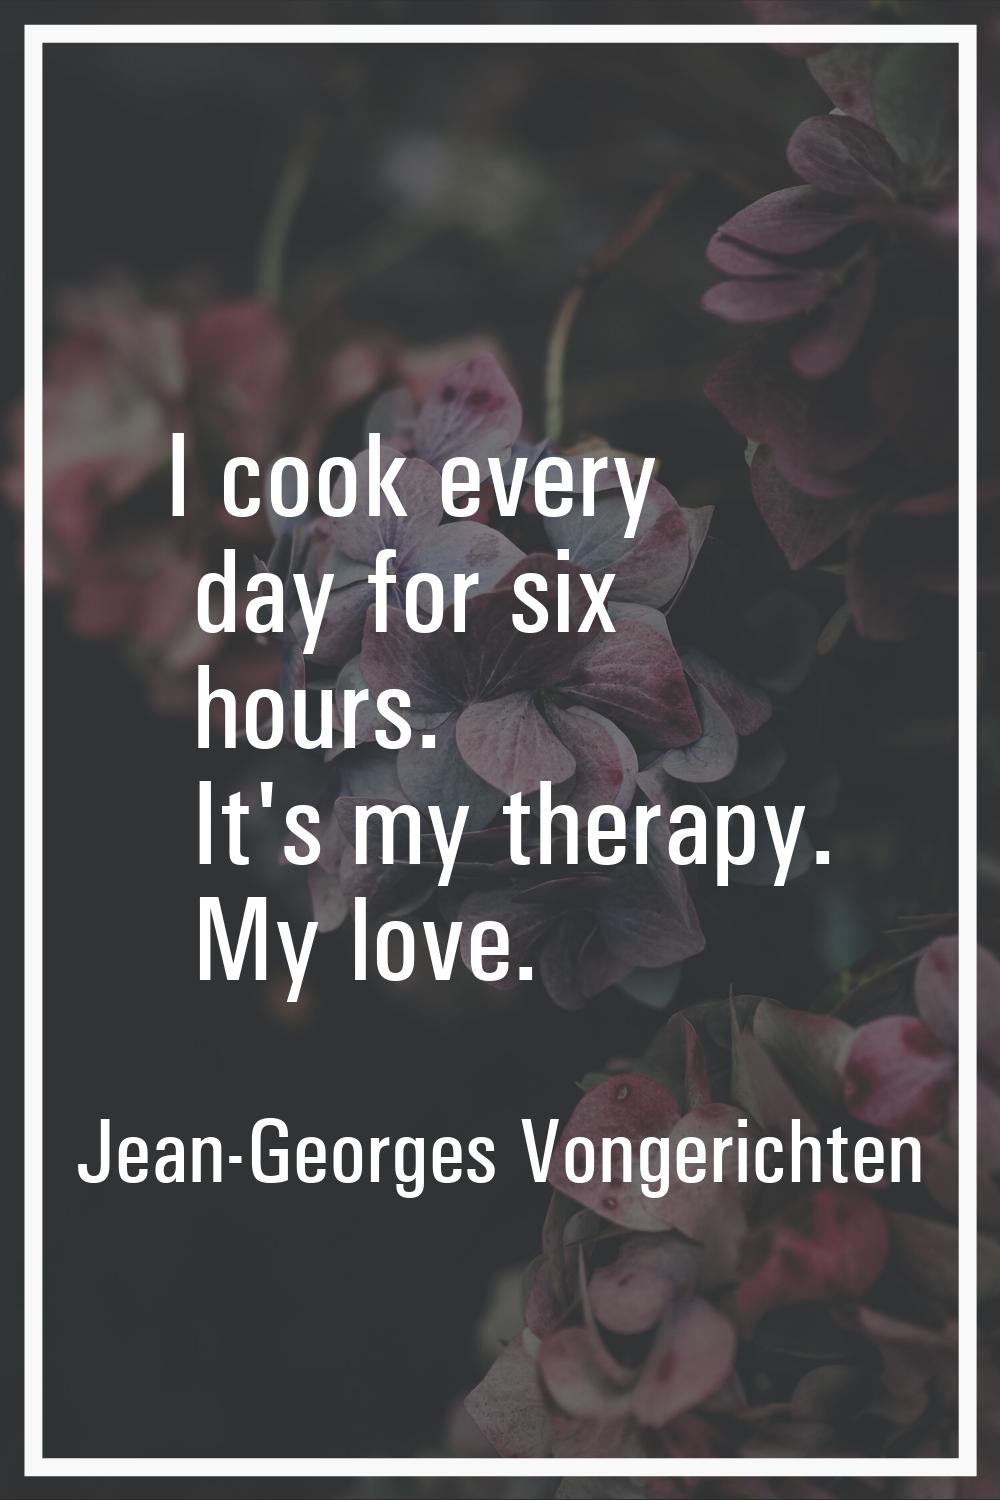 I cook every day for six hours. It's my therapy. My love.